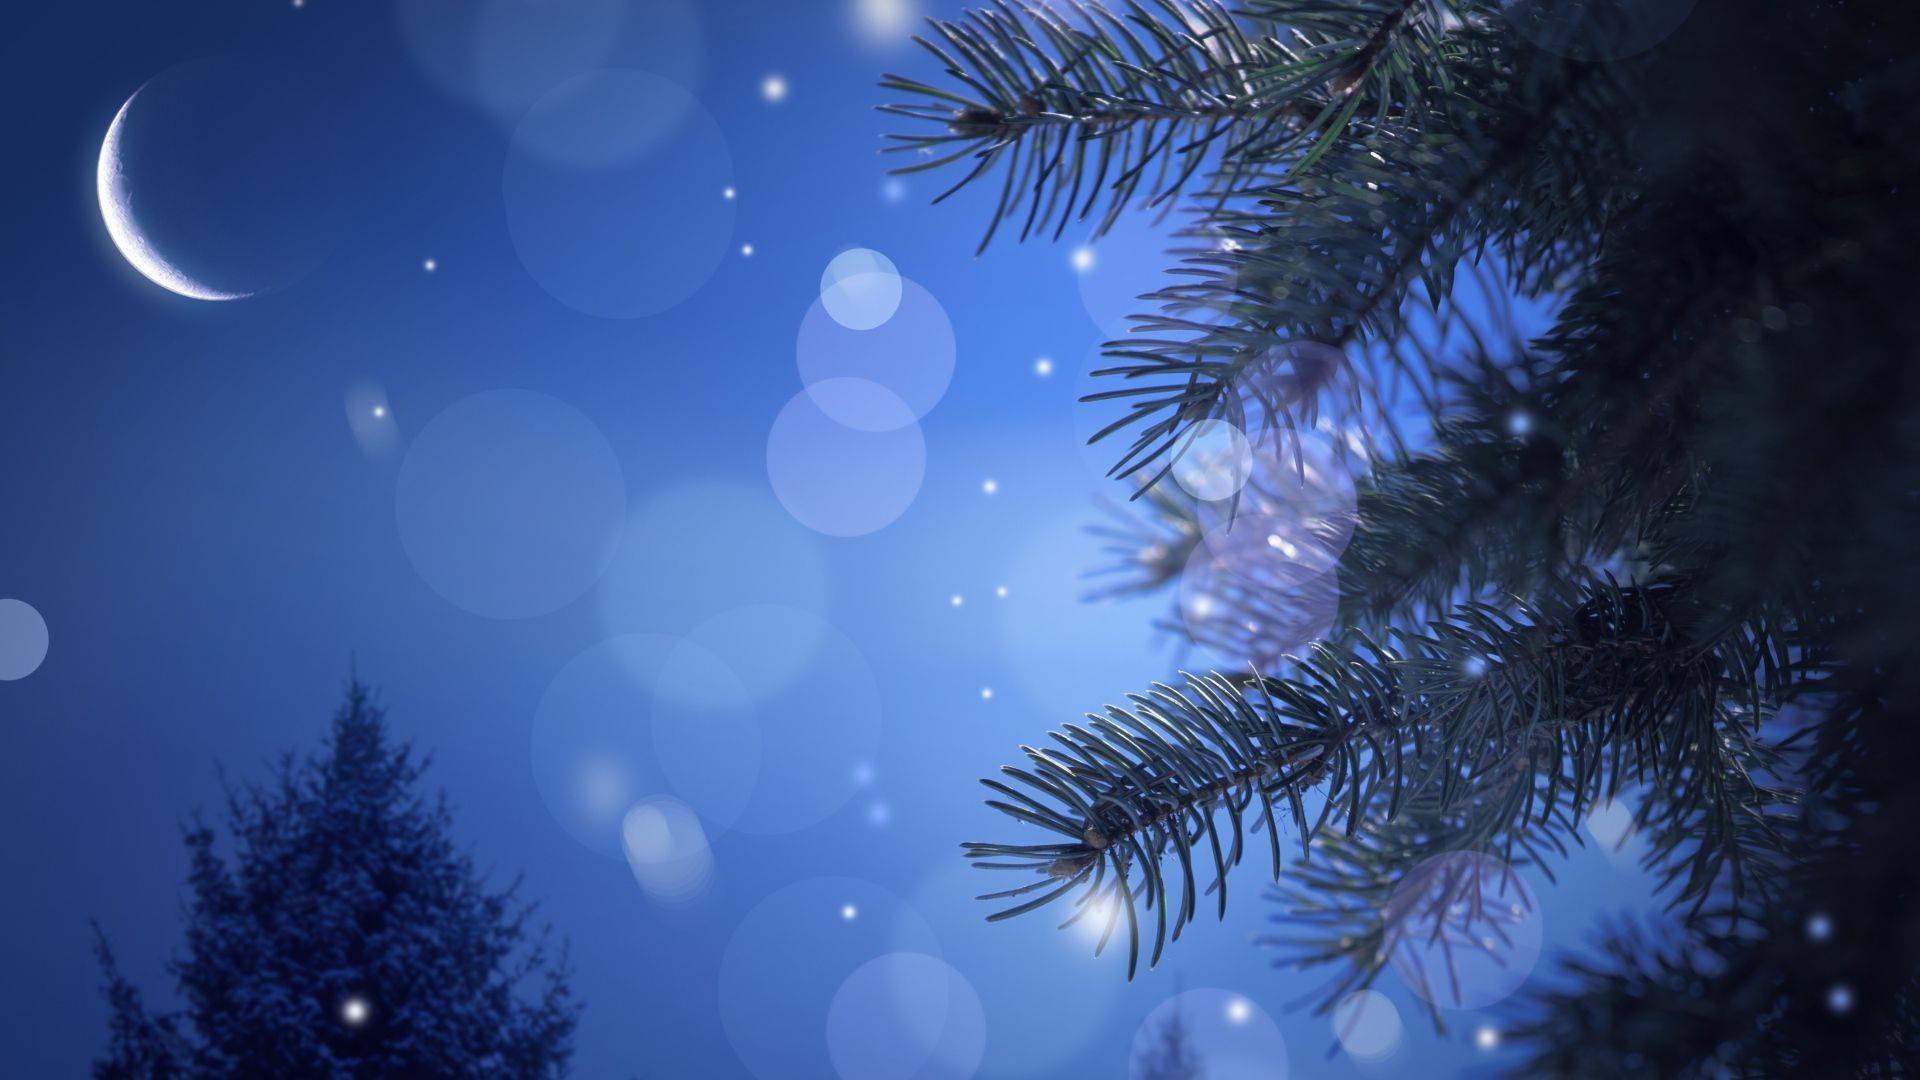 Wallpapers Christmas tree and moon highlights branches on the desktop